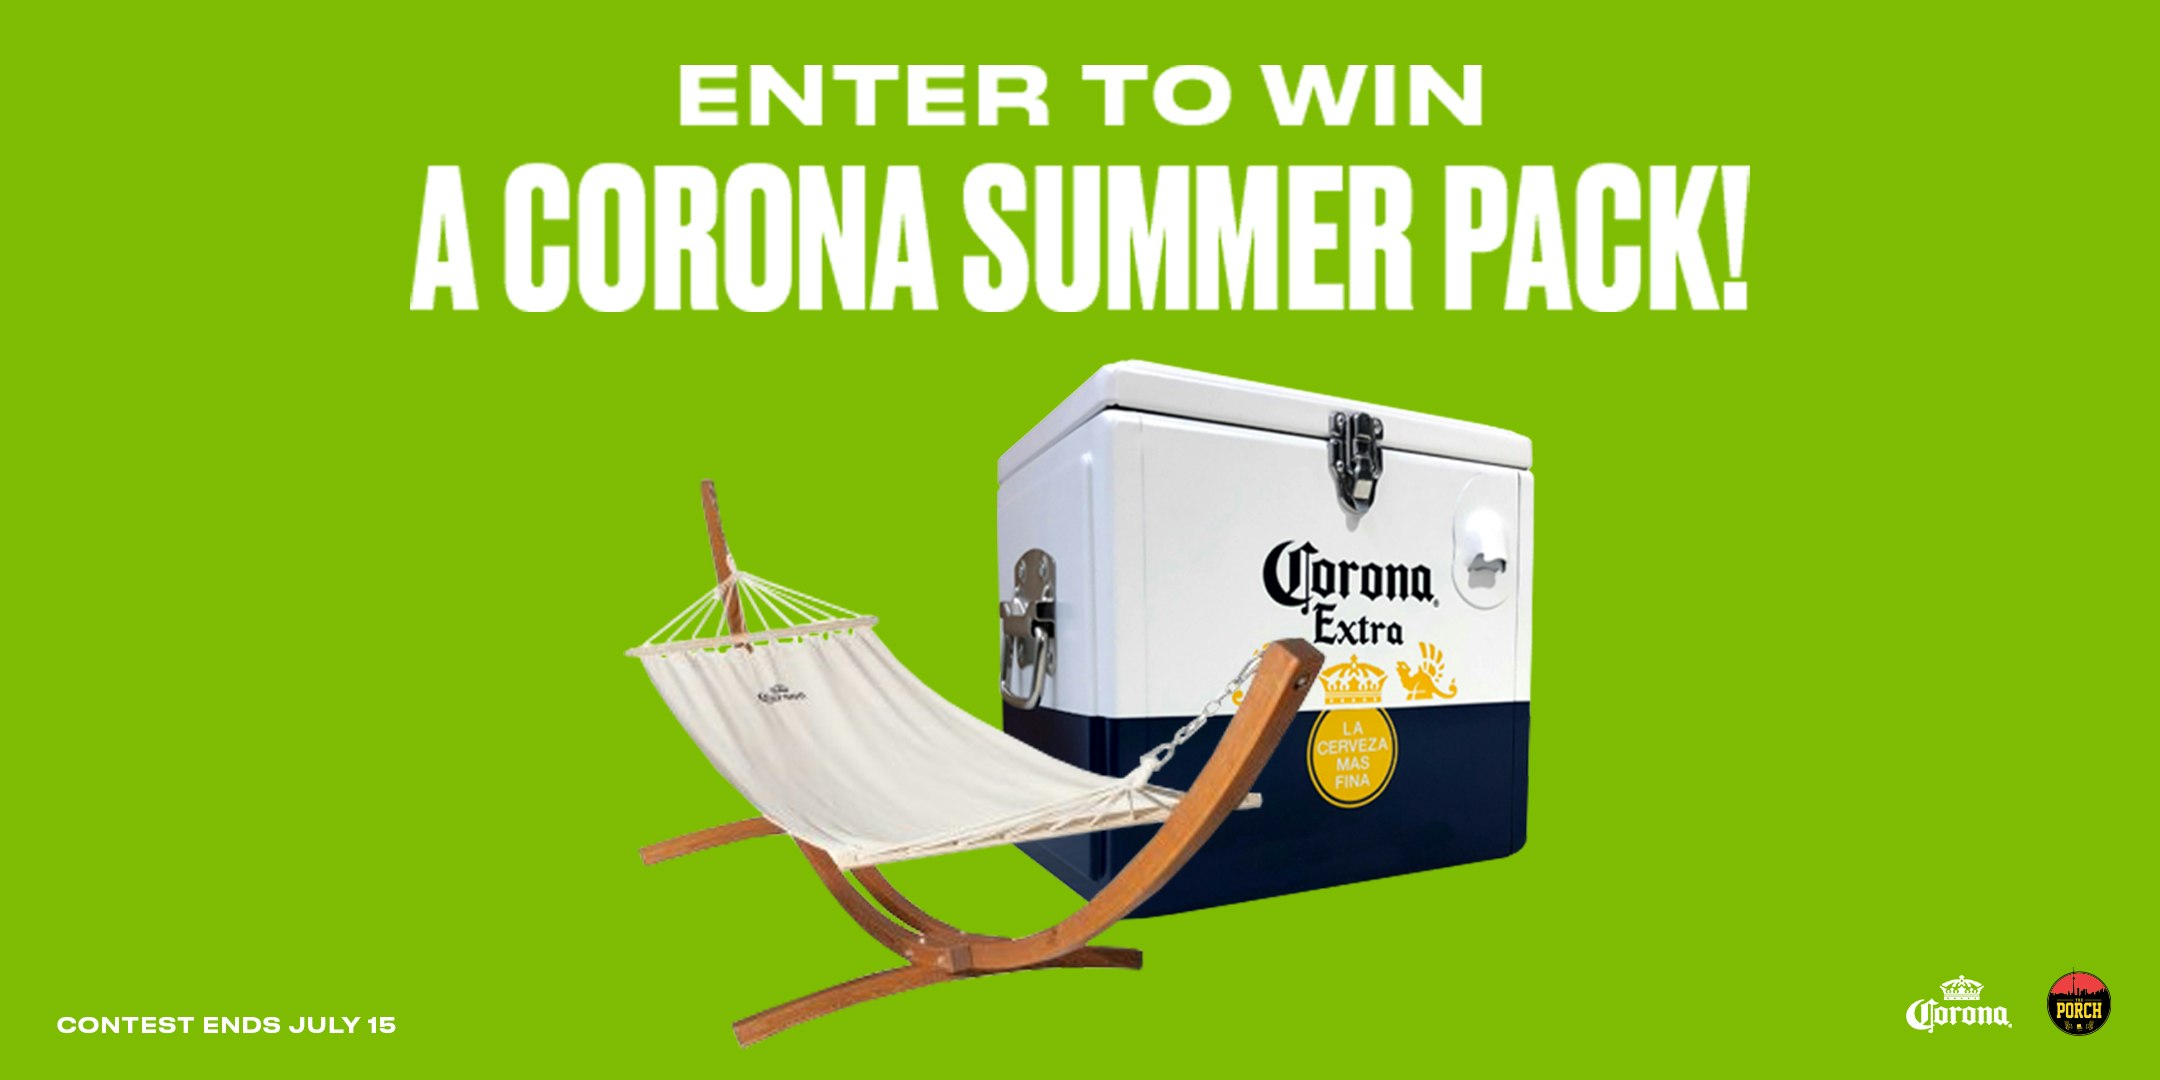 online contests, sweepstakes and giveaways - Toronto! Enter to A Corona Summer Pack & A Gift Card to The Porch!